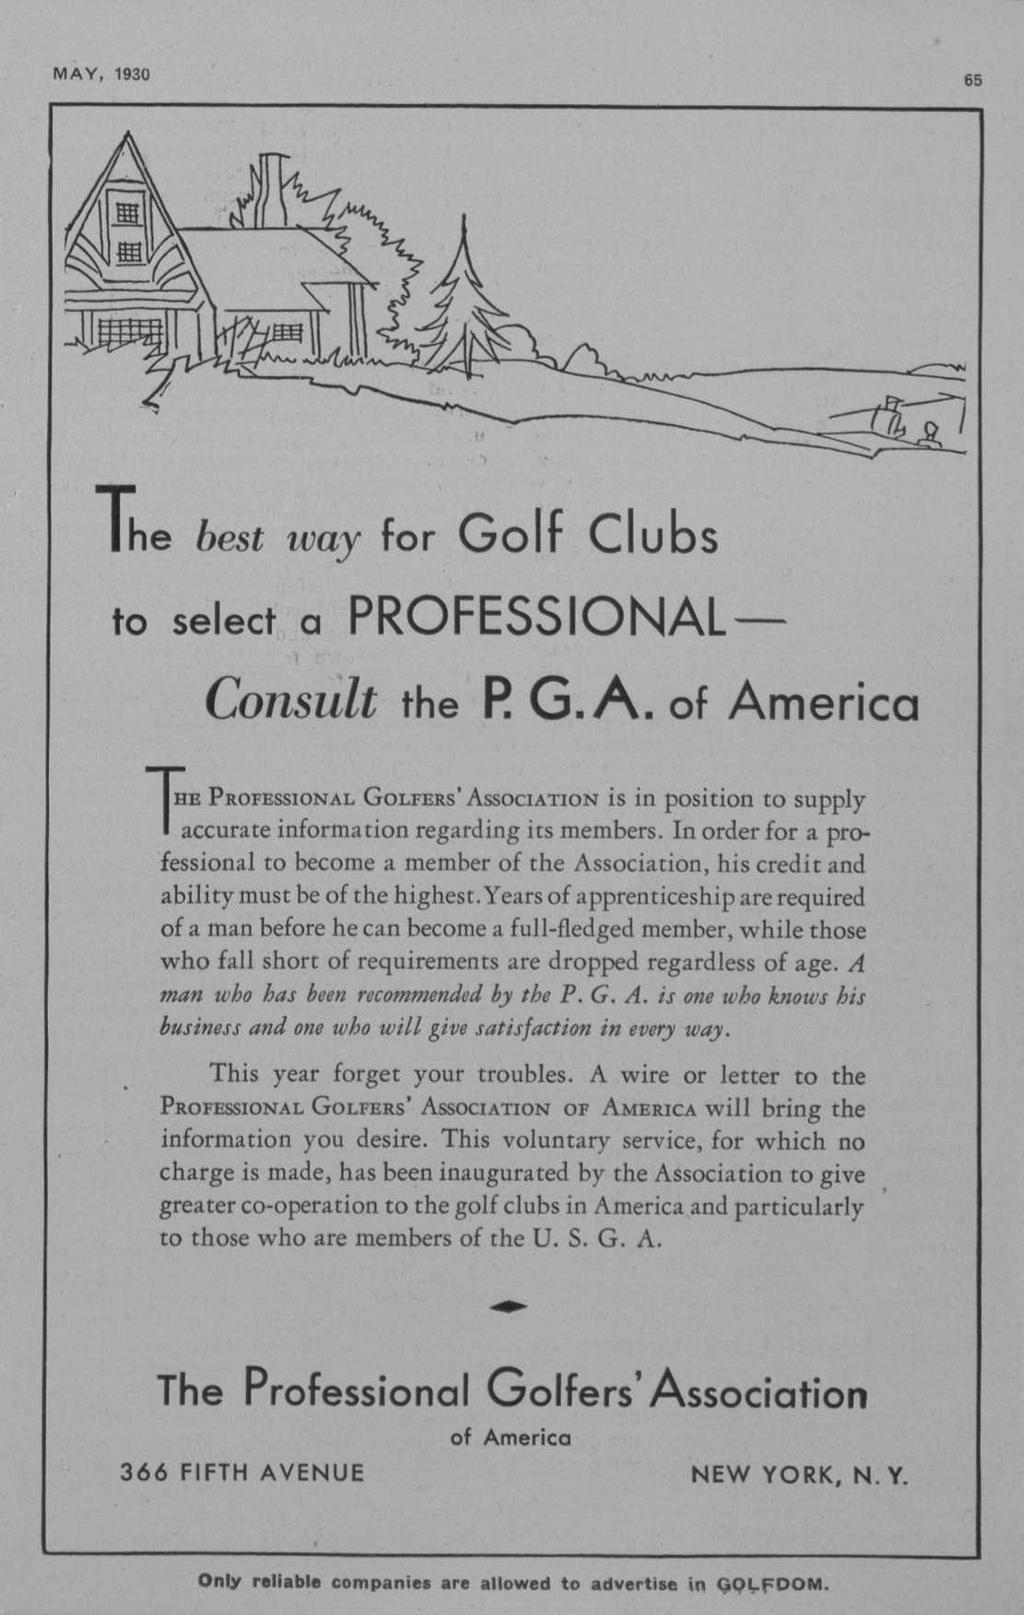 The best way for Golf Clu bs to select a PROFESSIONAL Consult the R G. A. of America I HE PROFESSIONAL GOLFERS'ASSOCIATION is in position to supply I accurate information regarding its members.